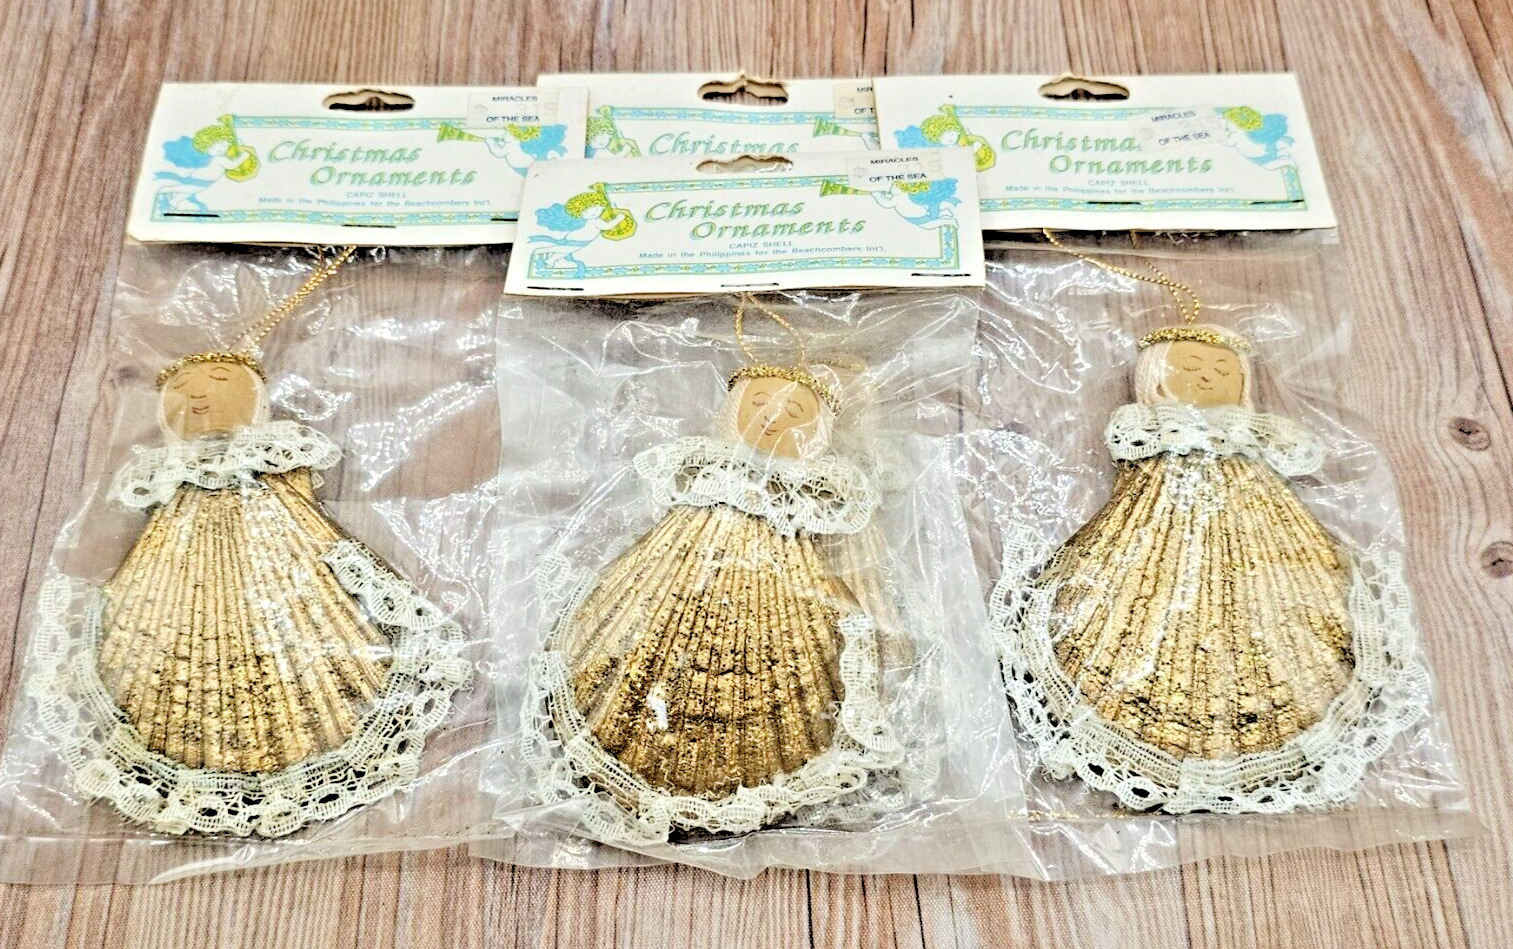 Christmas 4 Pkgs of Vintage Angels Ornaments w/Sea Shell Body & Wooden Head NOS